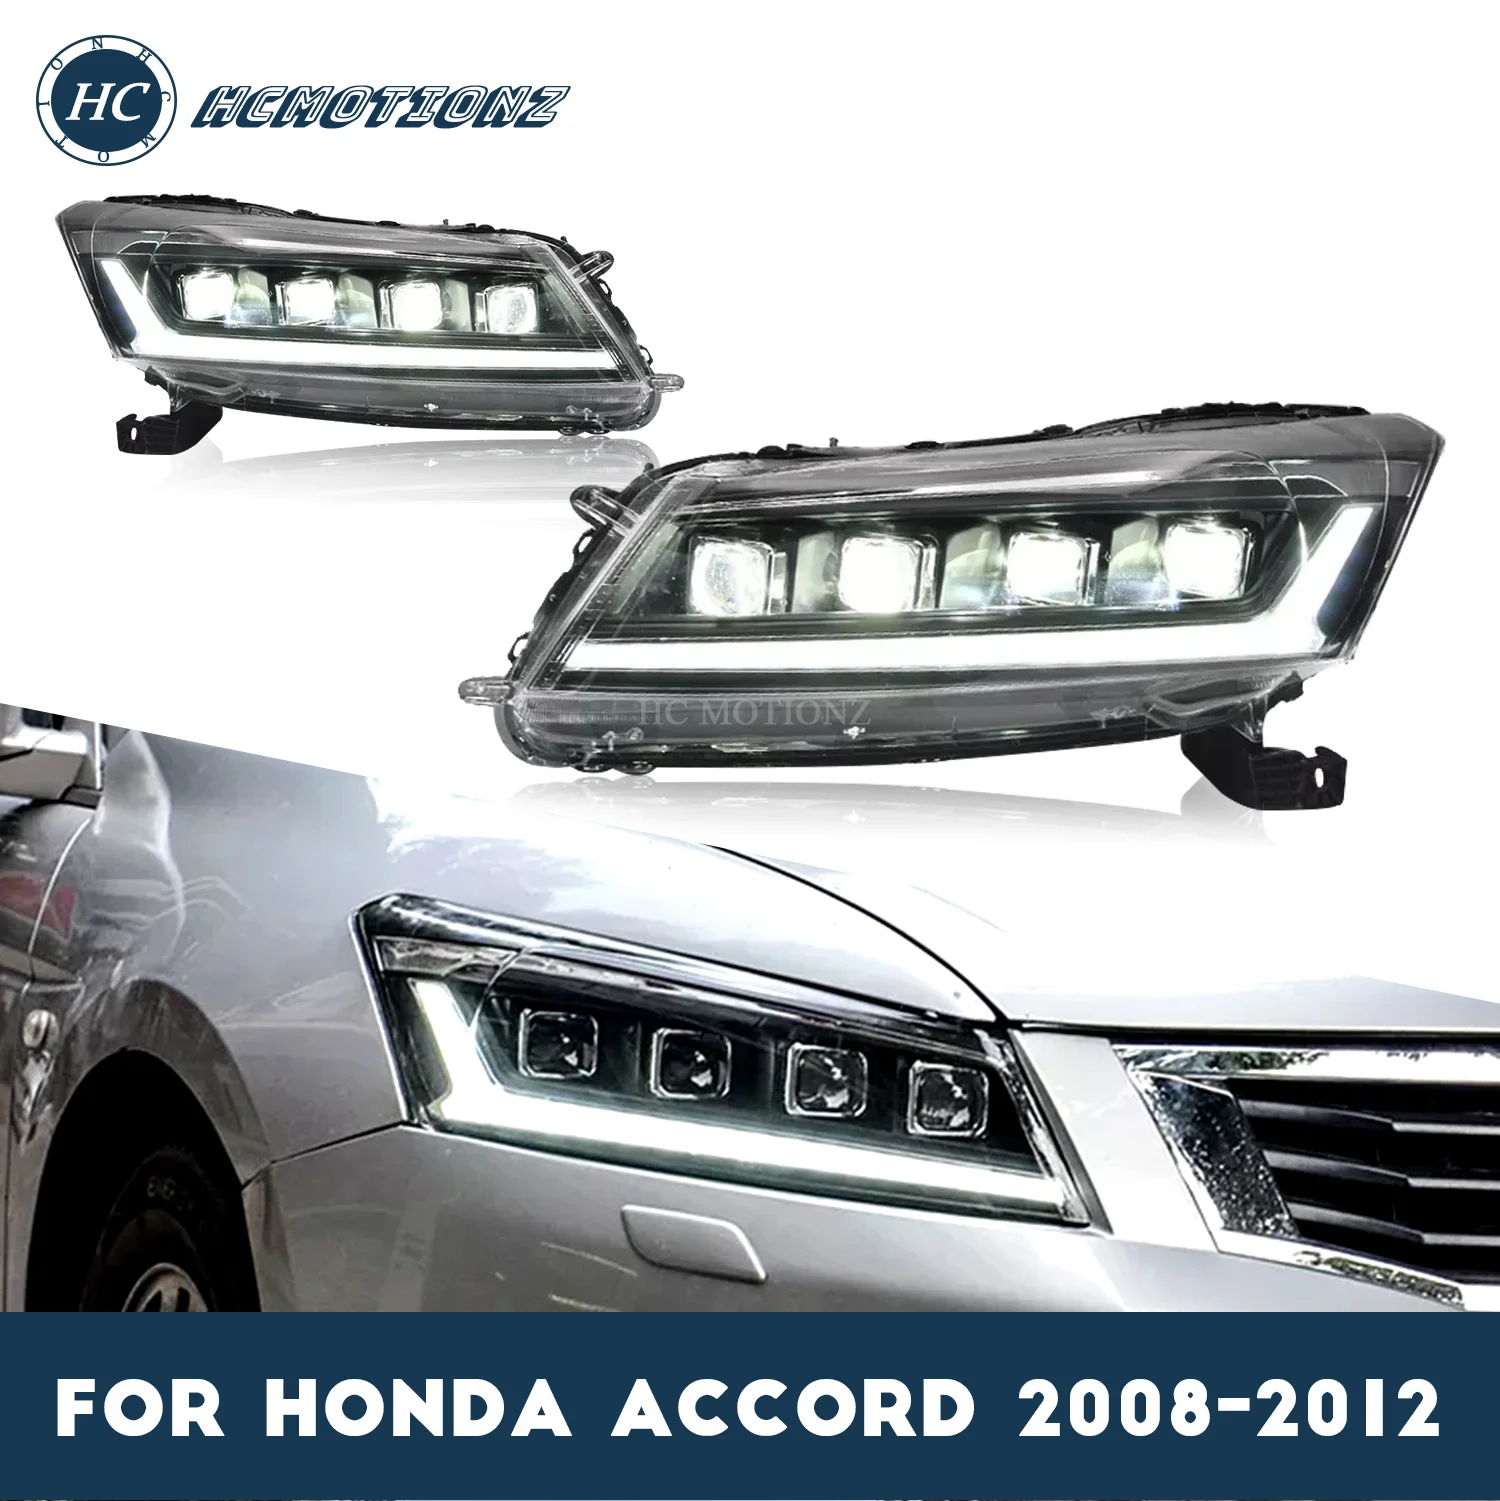 

HCMOTIONZ LED Headlights Assembly For Honda Accord 2008 2009 2010 2011 2012 8th Gen 4-Dr Sedan With Sequential Turn Signal DRL